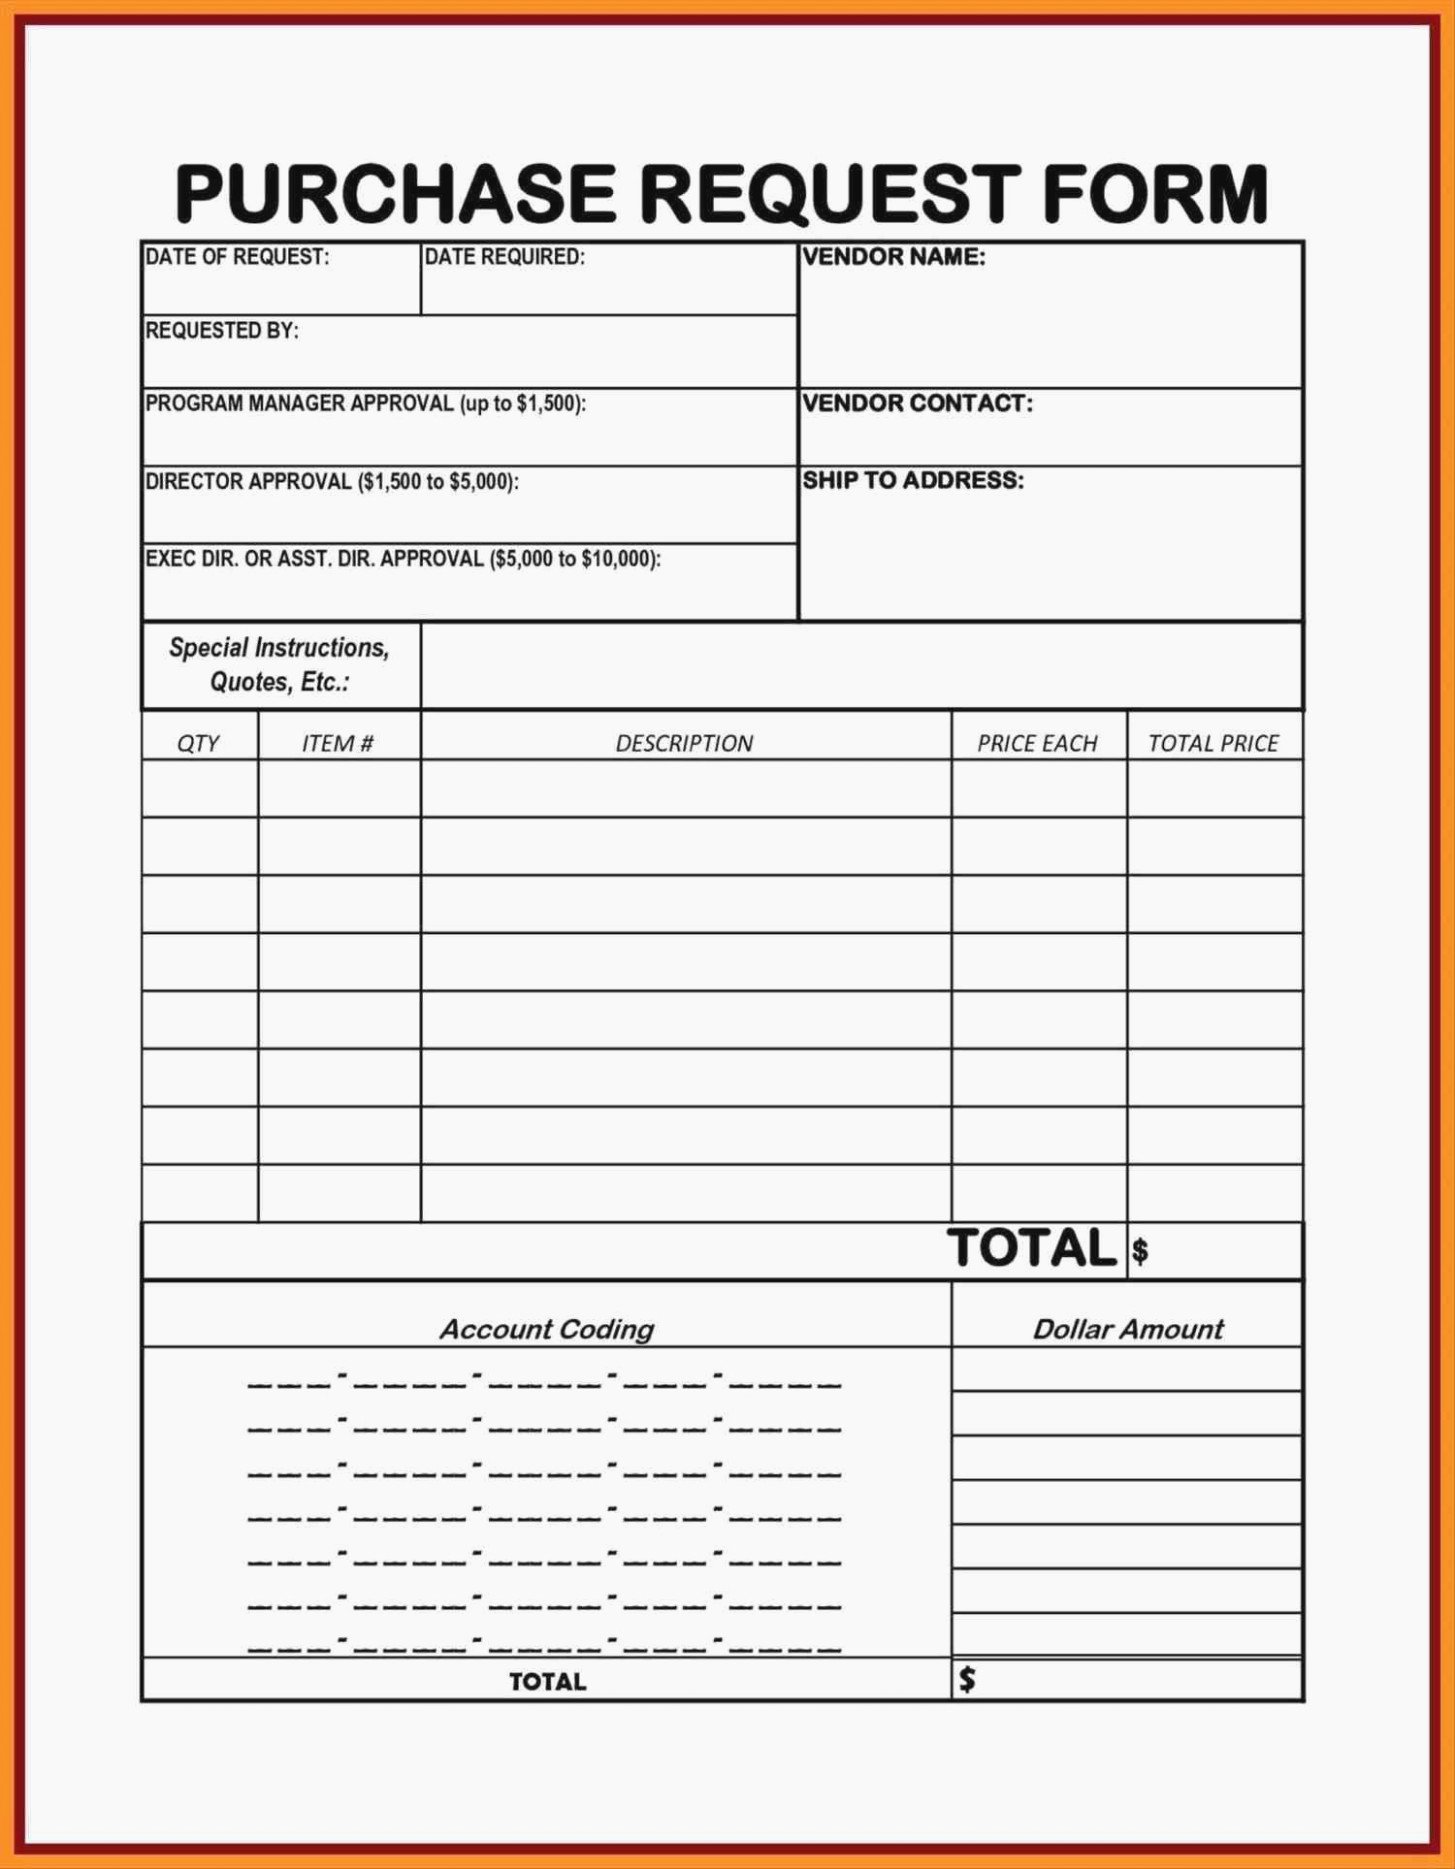 Purchase Request form Template Elegant Most Effective Ways to